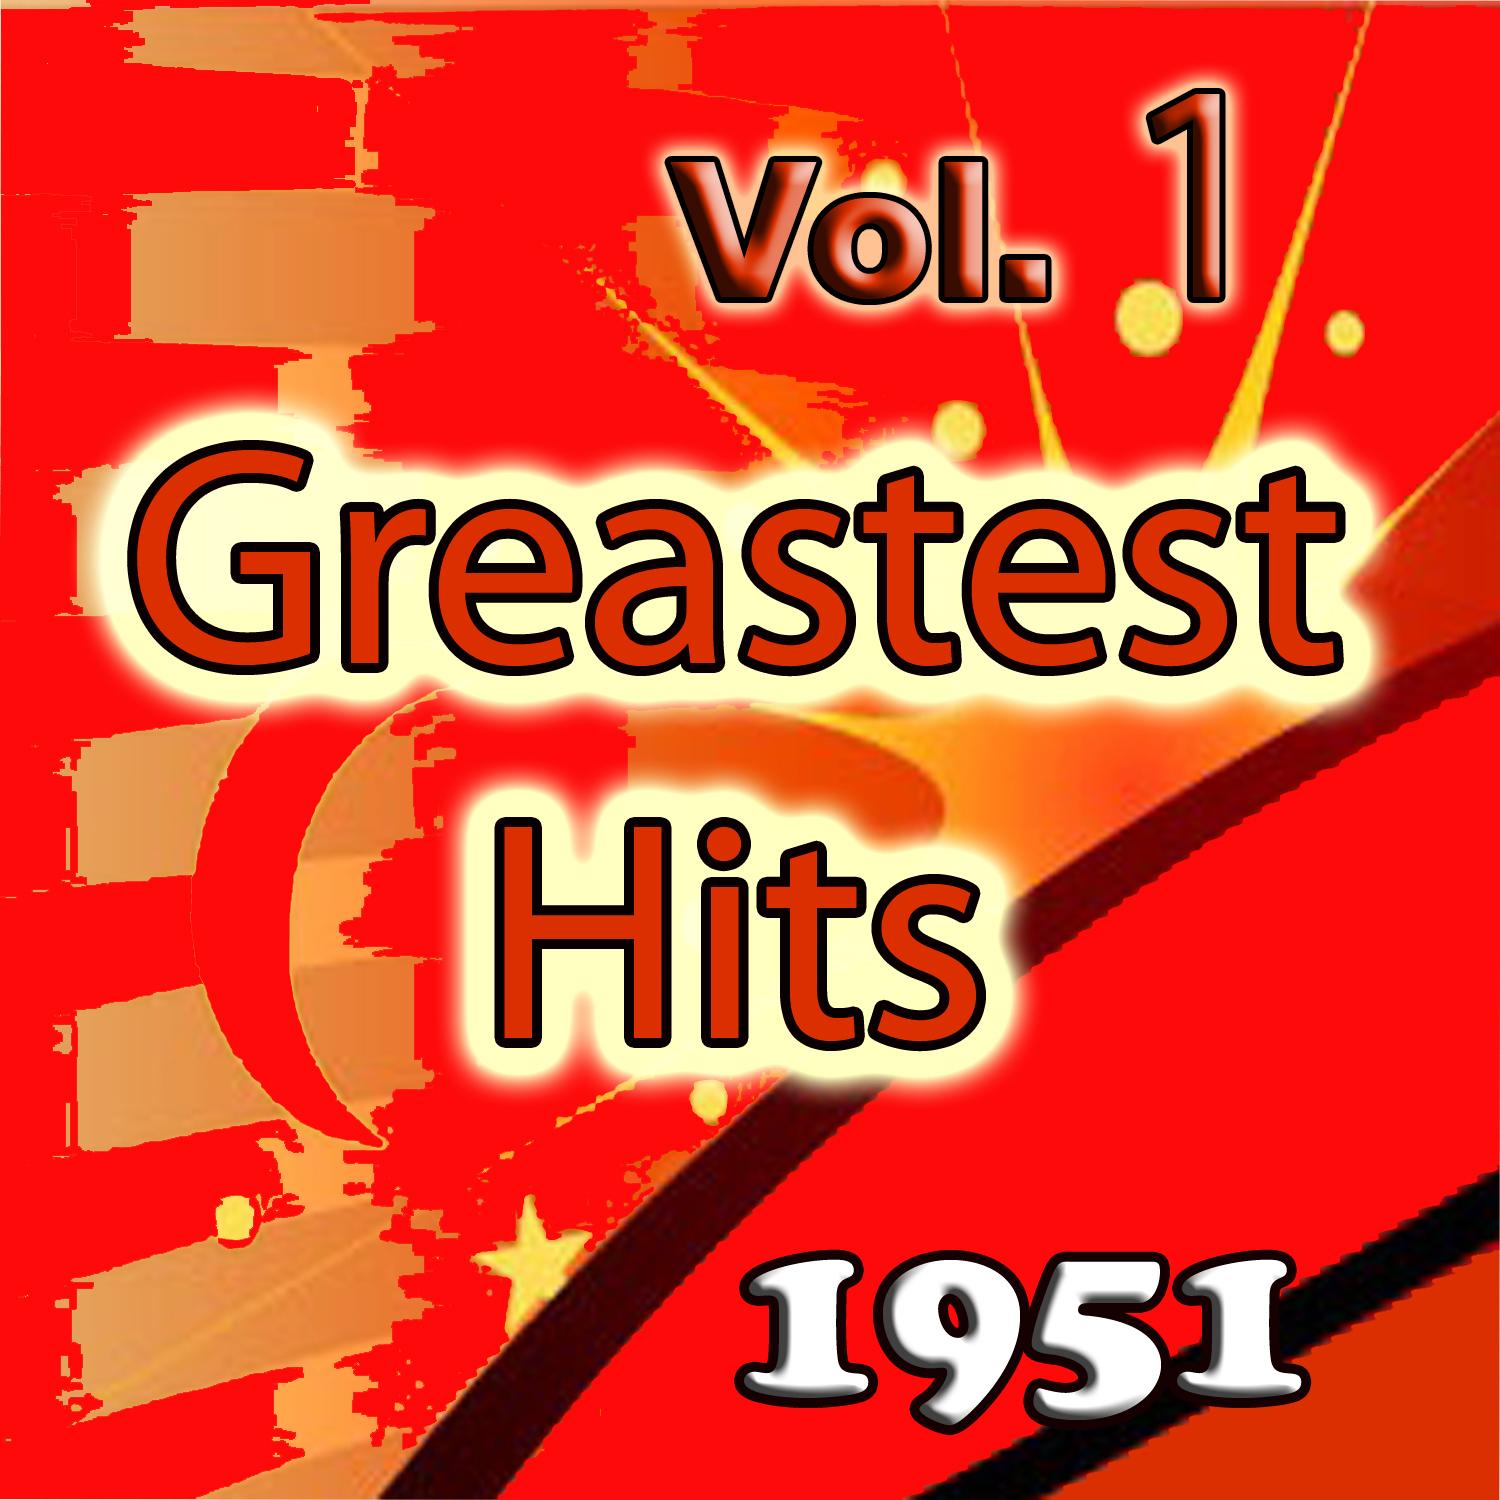 Greatest Hits of 1951, Vol. 1